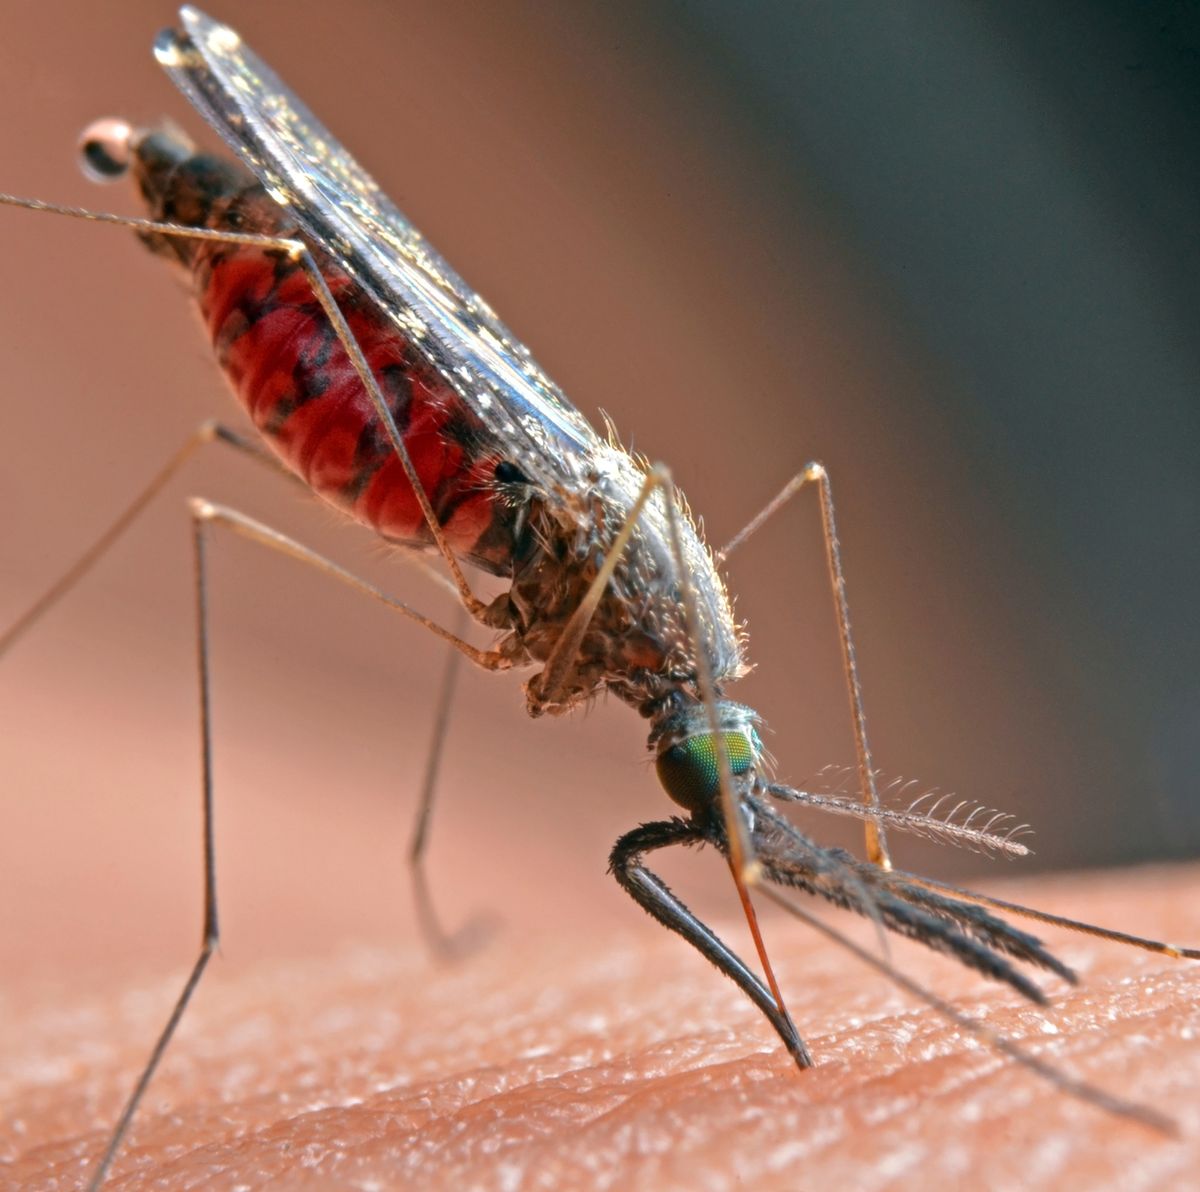 How to Control Mosquitoes Without Killing Pollinators and Other